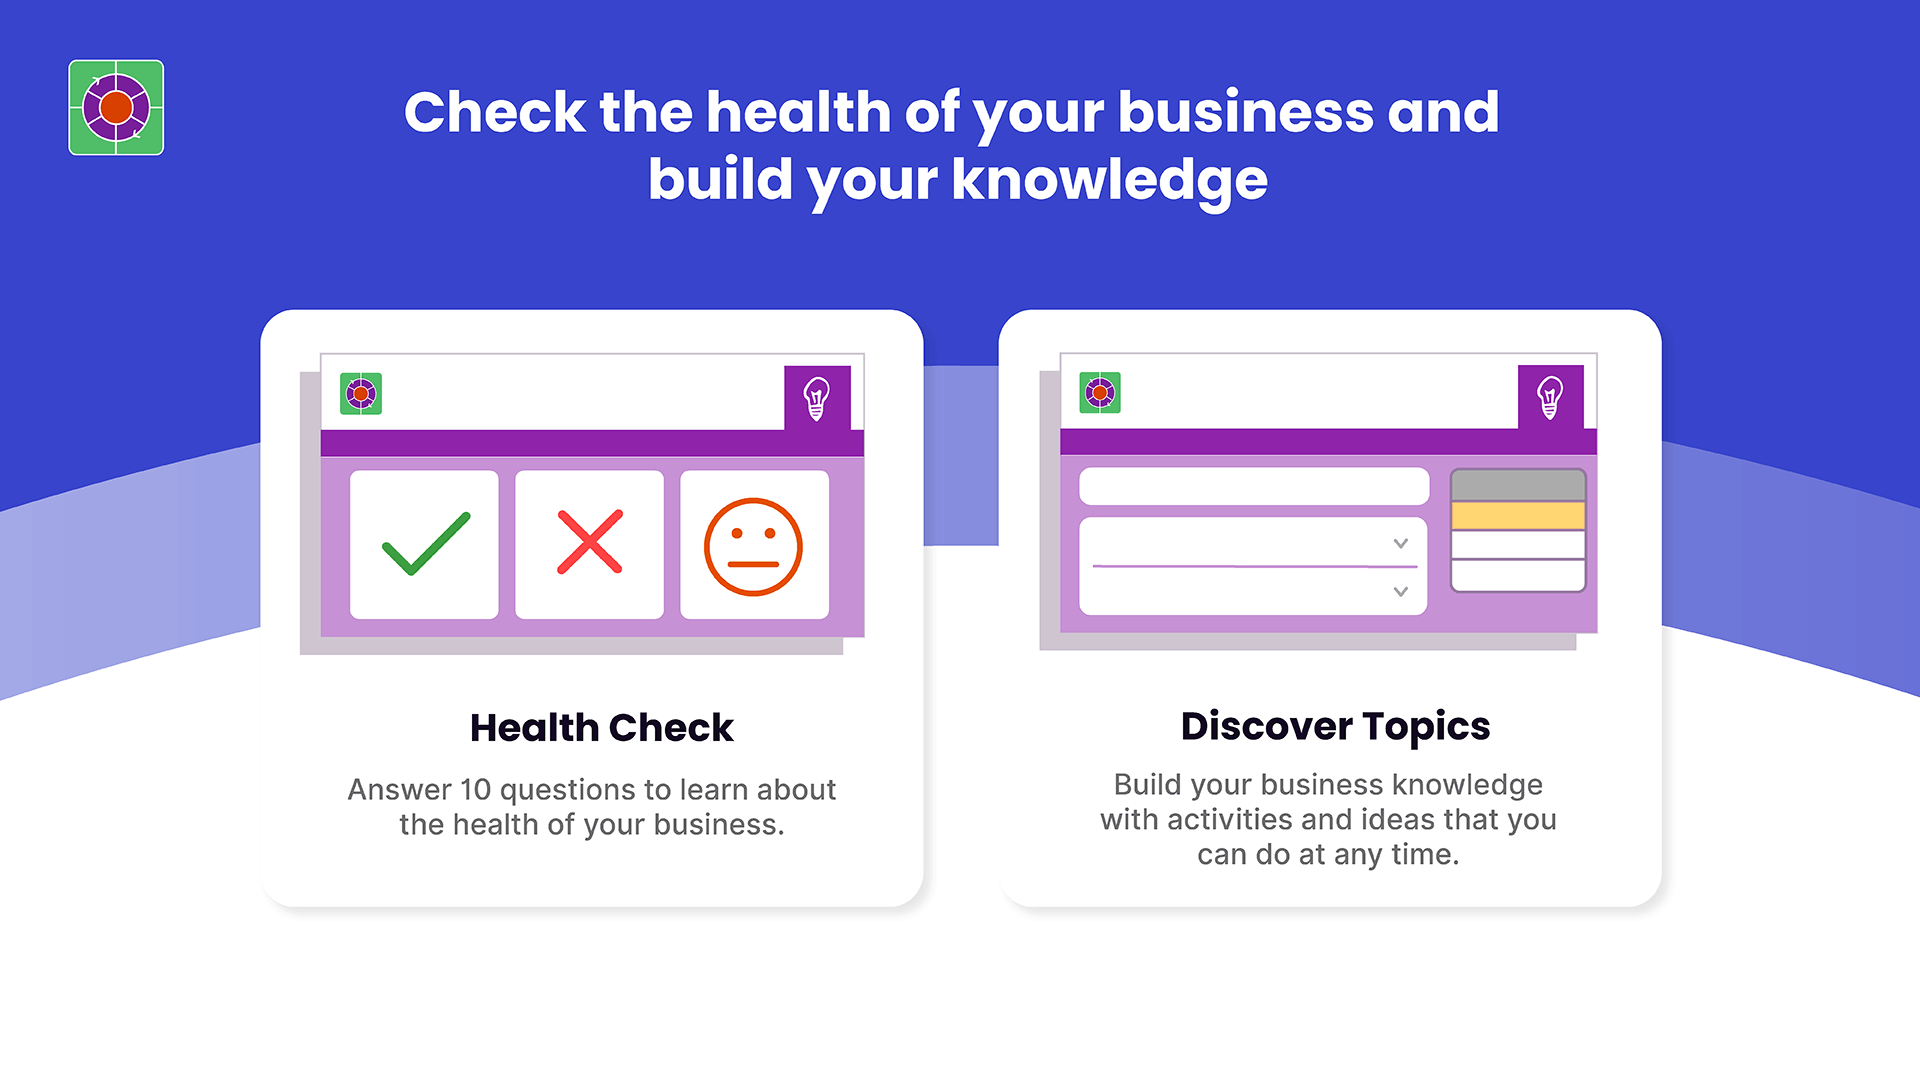 Check the health of your business and build your knowledge